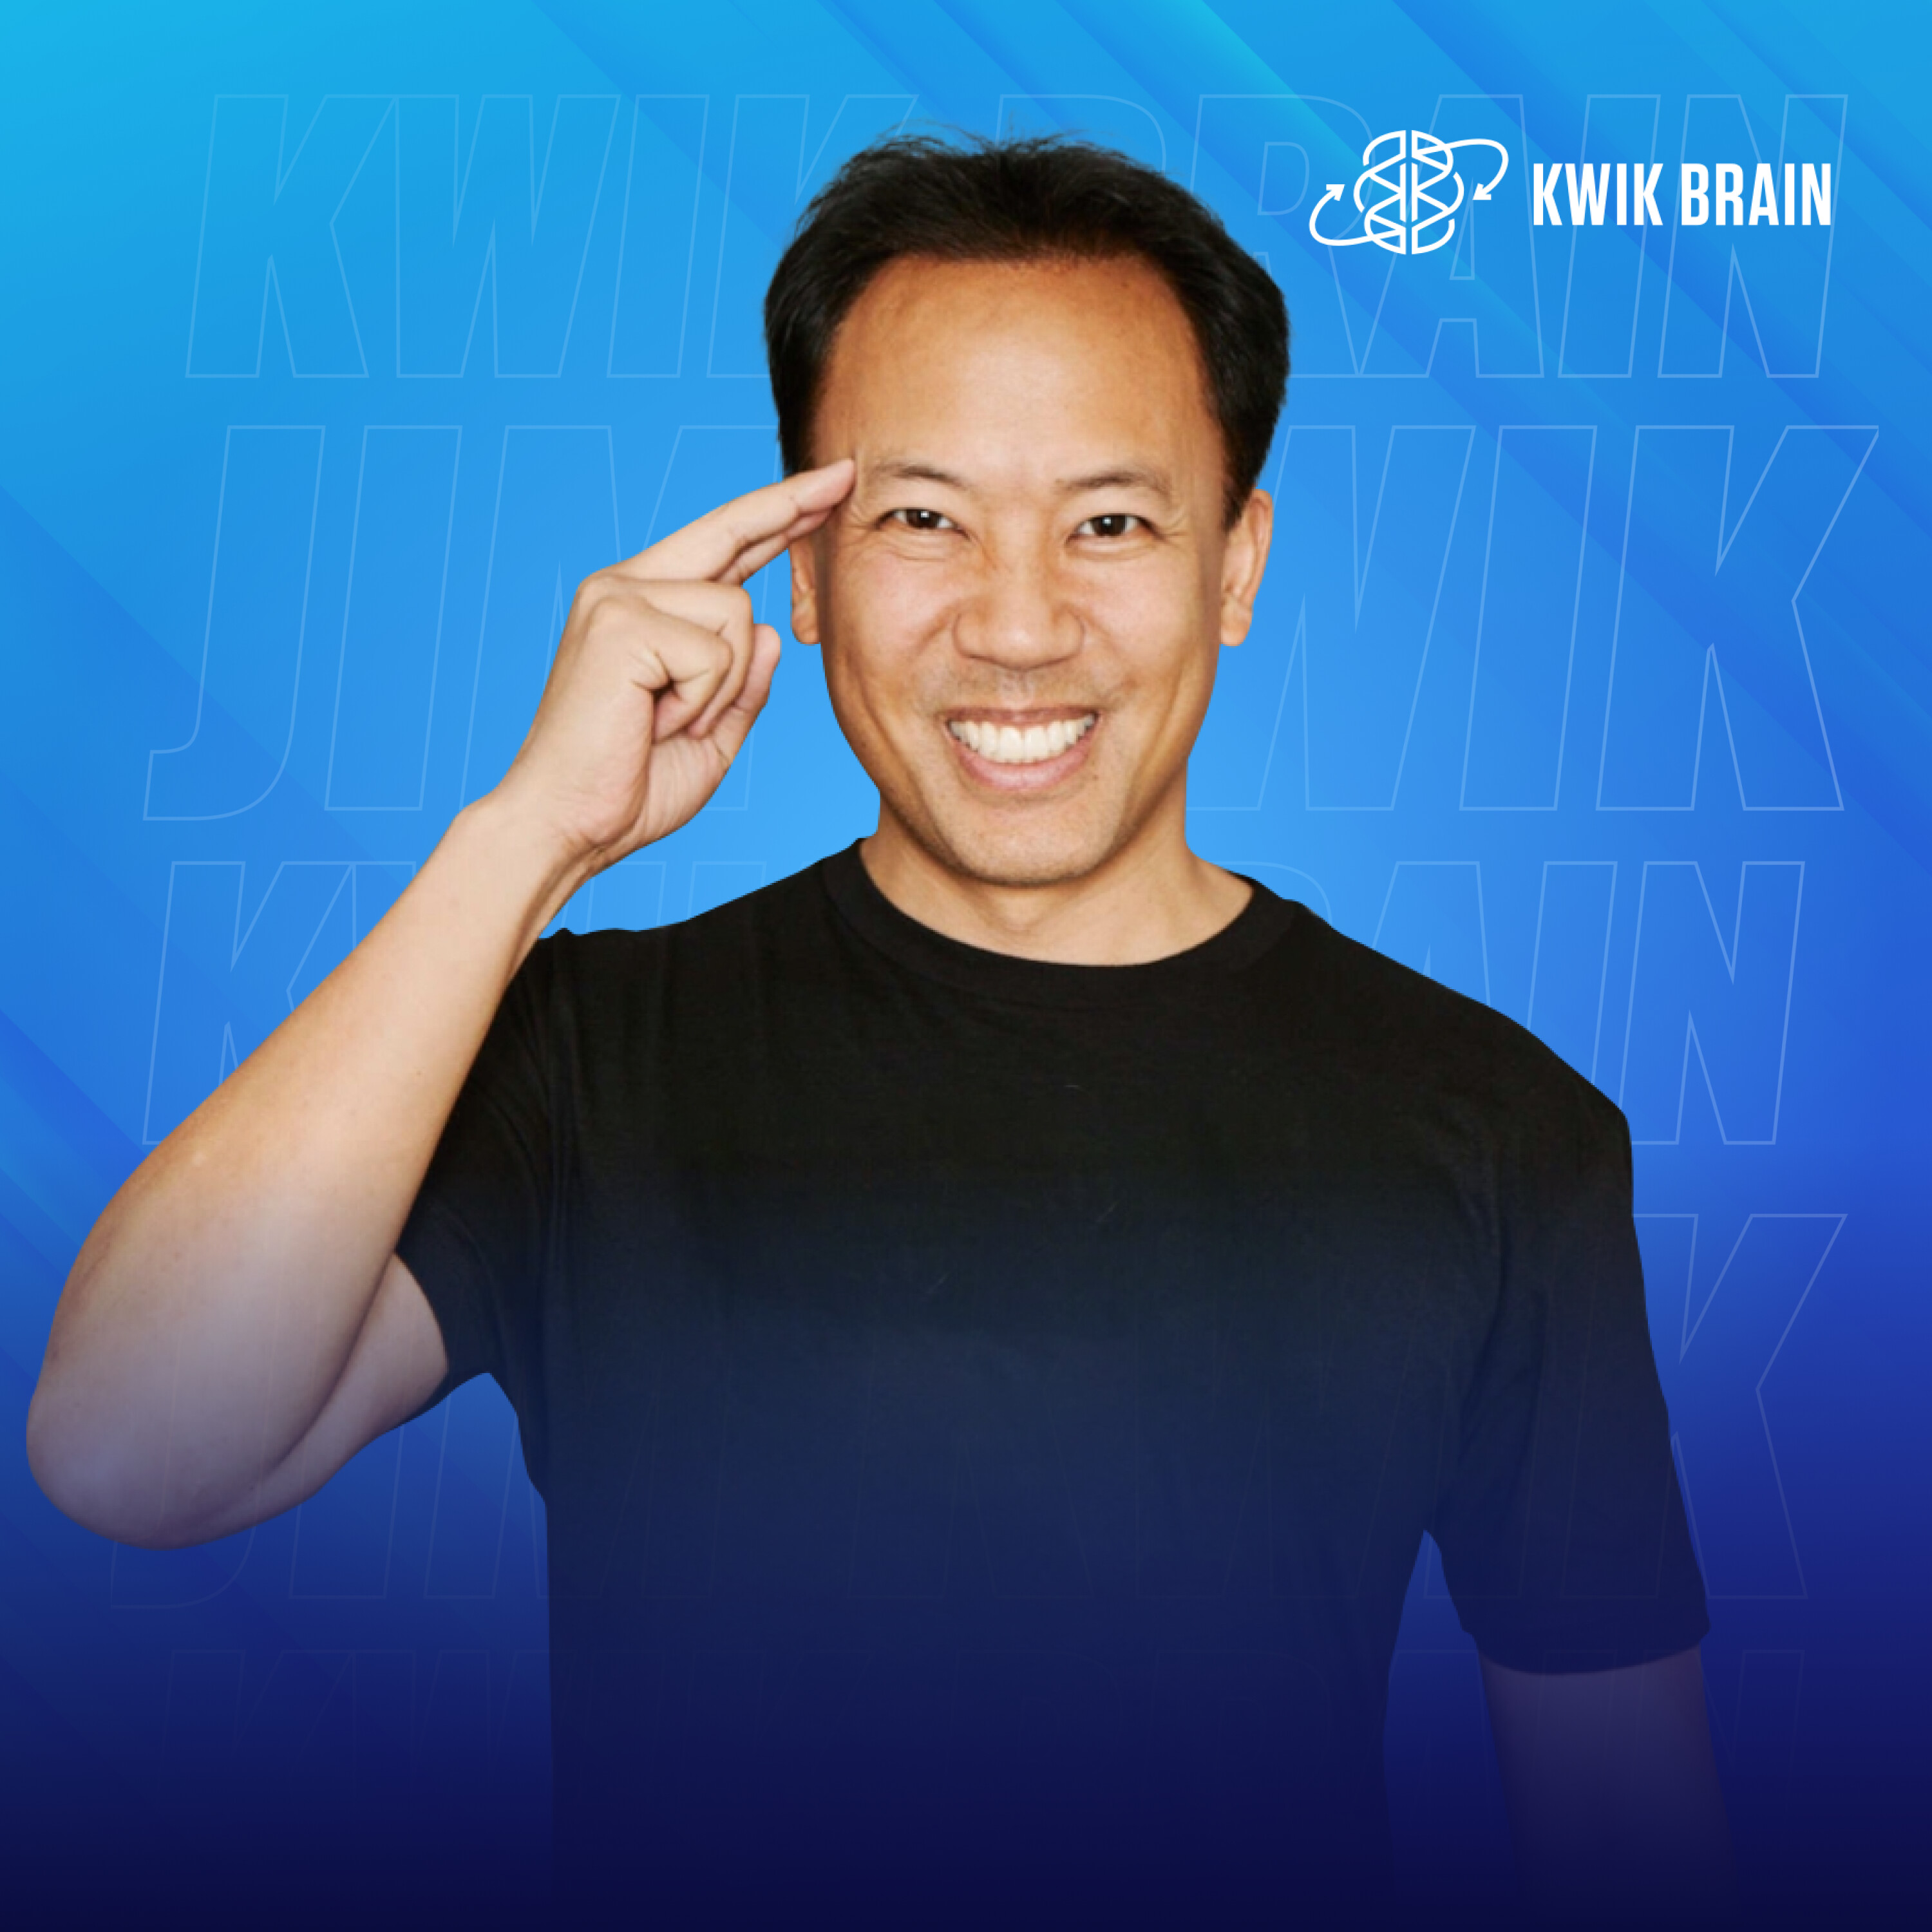 5 Ways to Recover From Life Setbacks with Jim Kwik